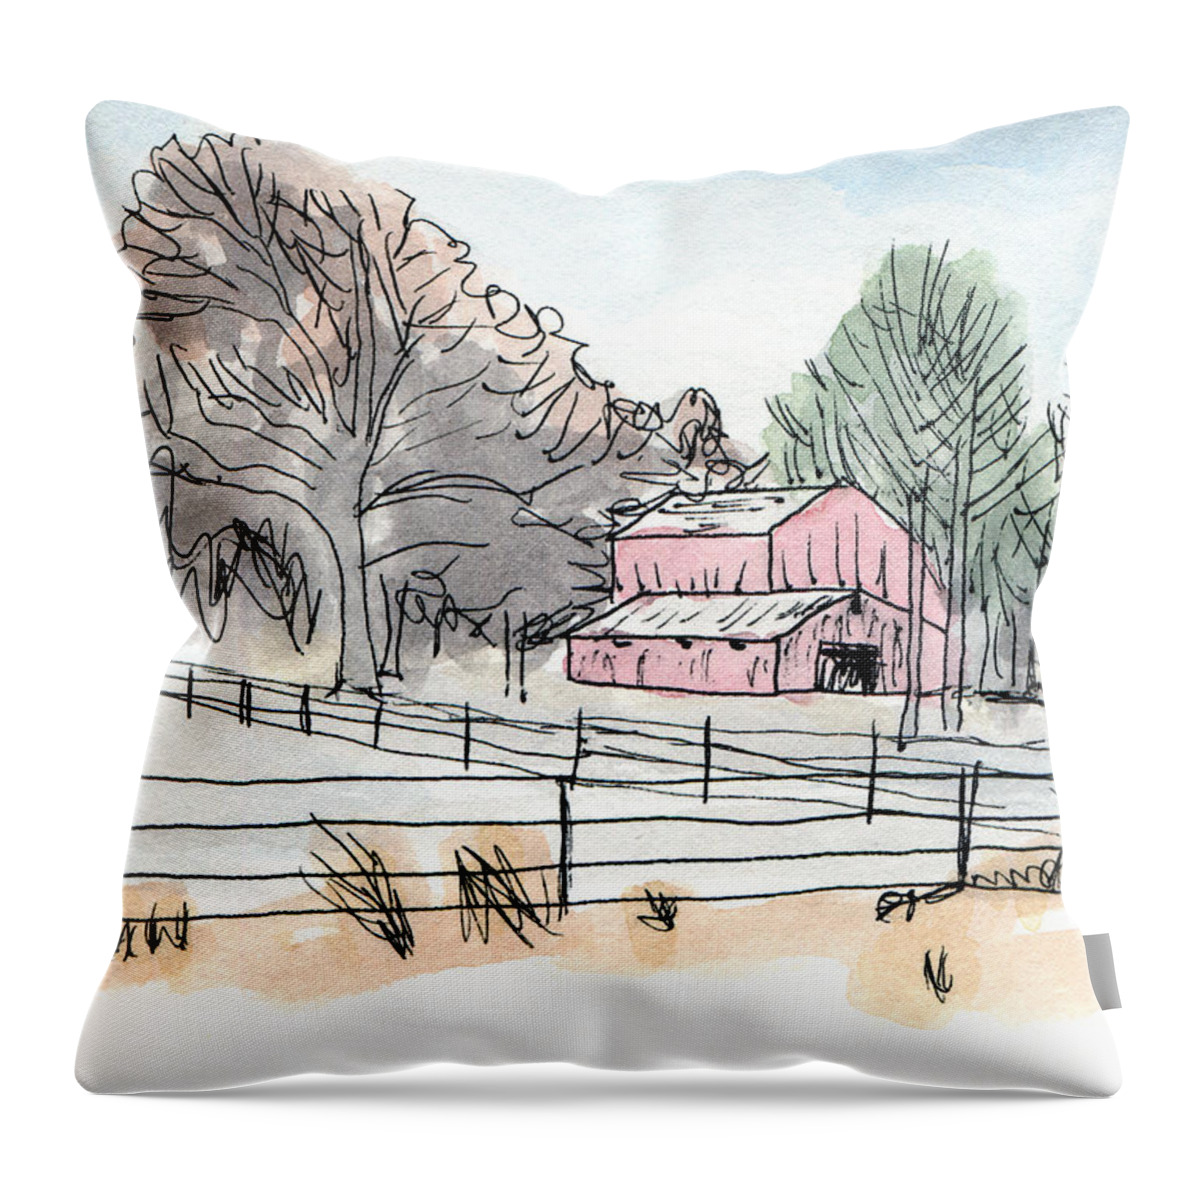 Farm Rural Old Country Nostalgia Barn America Scene Landscape Home American Scenic Rustic Red Place Life Art Time Peace Painting Nostalgic Line County Americana Outdoors Ink Hill Farmstead Countryside Woods Trees Tin Roof Shelter Shed Quiet Picturesque Orange North Metal Kyllo Idyllic Iconic Homestead Day Calm Building Artistic Weathered Visit Tree Tranquil Traditional Simple Scenery Restful Quietness Peaceful Midwest Memories Grandpa Grandma Buildings Artwork Southern Watercolor Wash Throw Pillow featuring the mixed media Barn in Winter Woods by R Kyllo